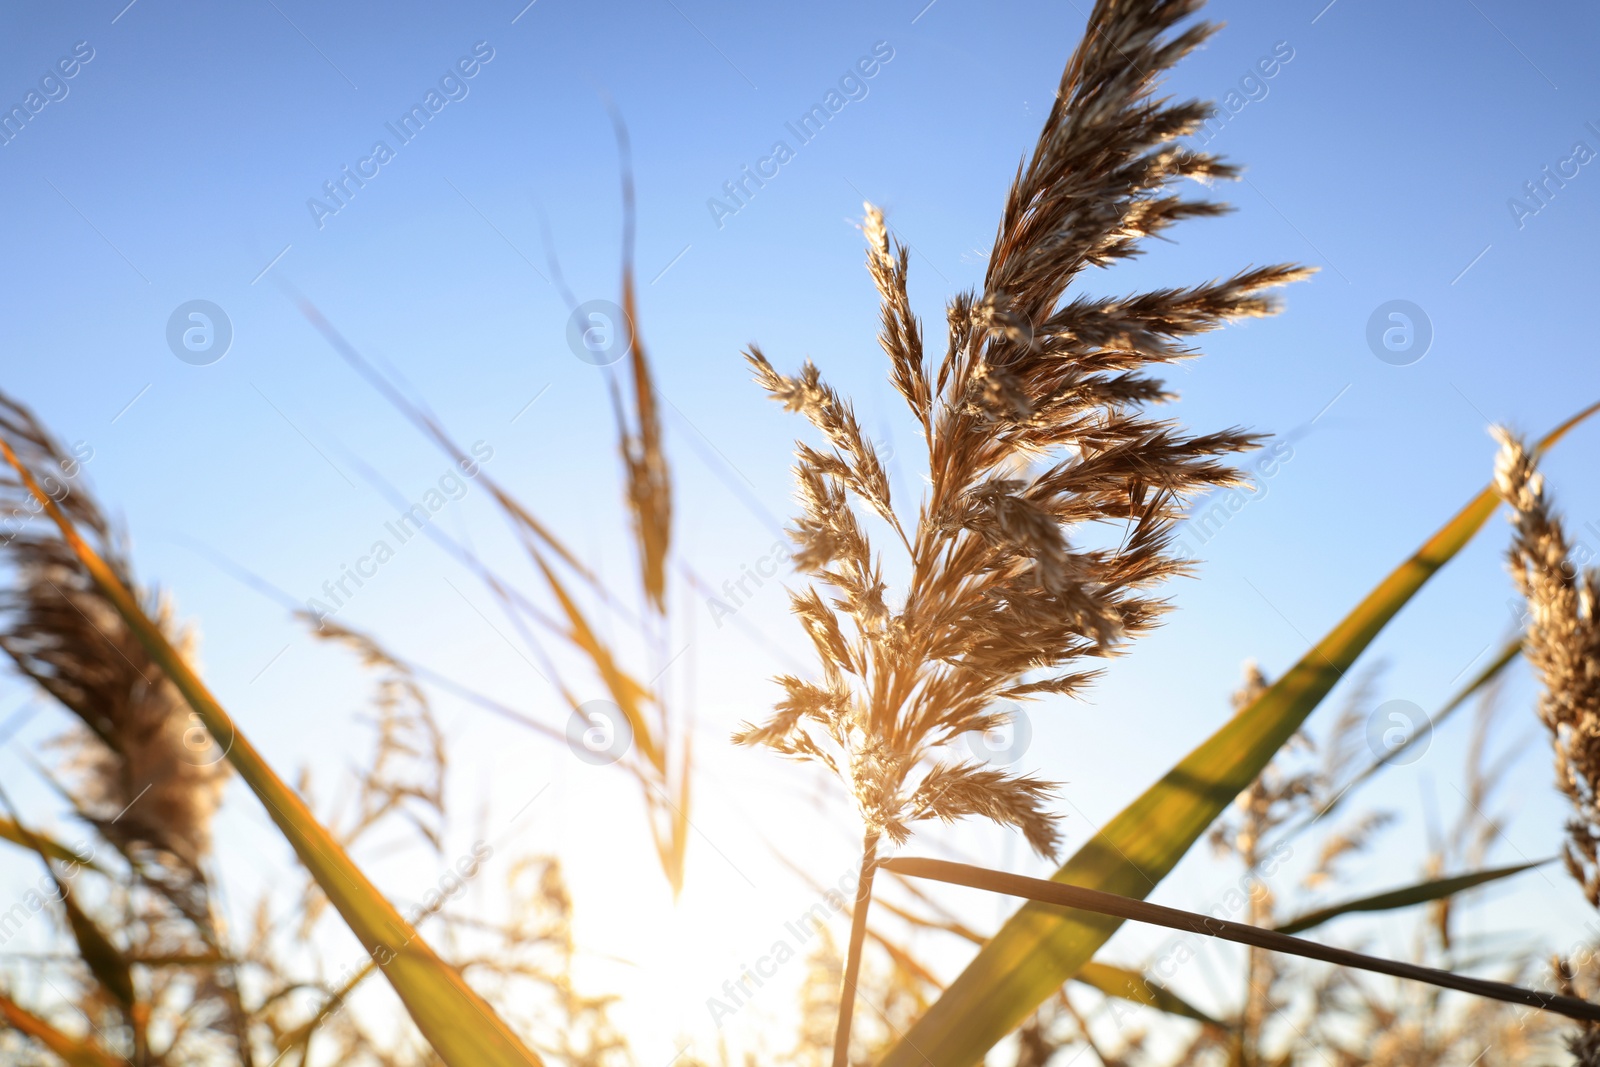 Photo of Dry reed growing outdoors on sunny day, closeup